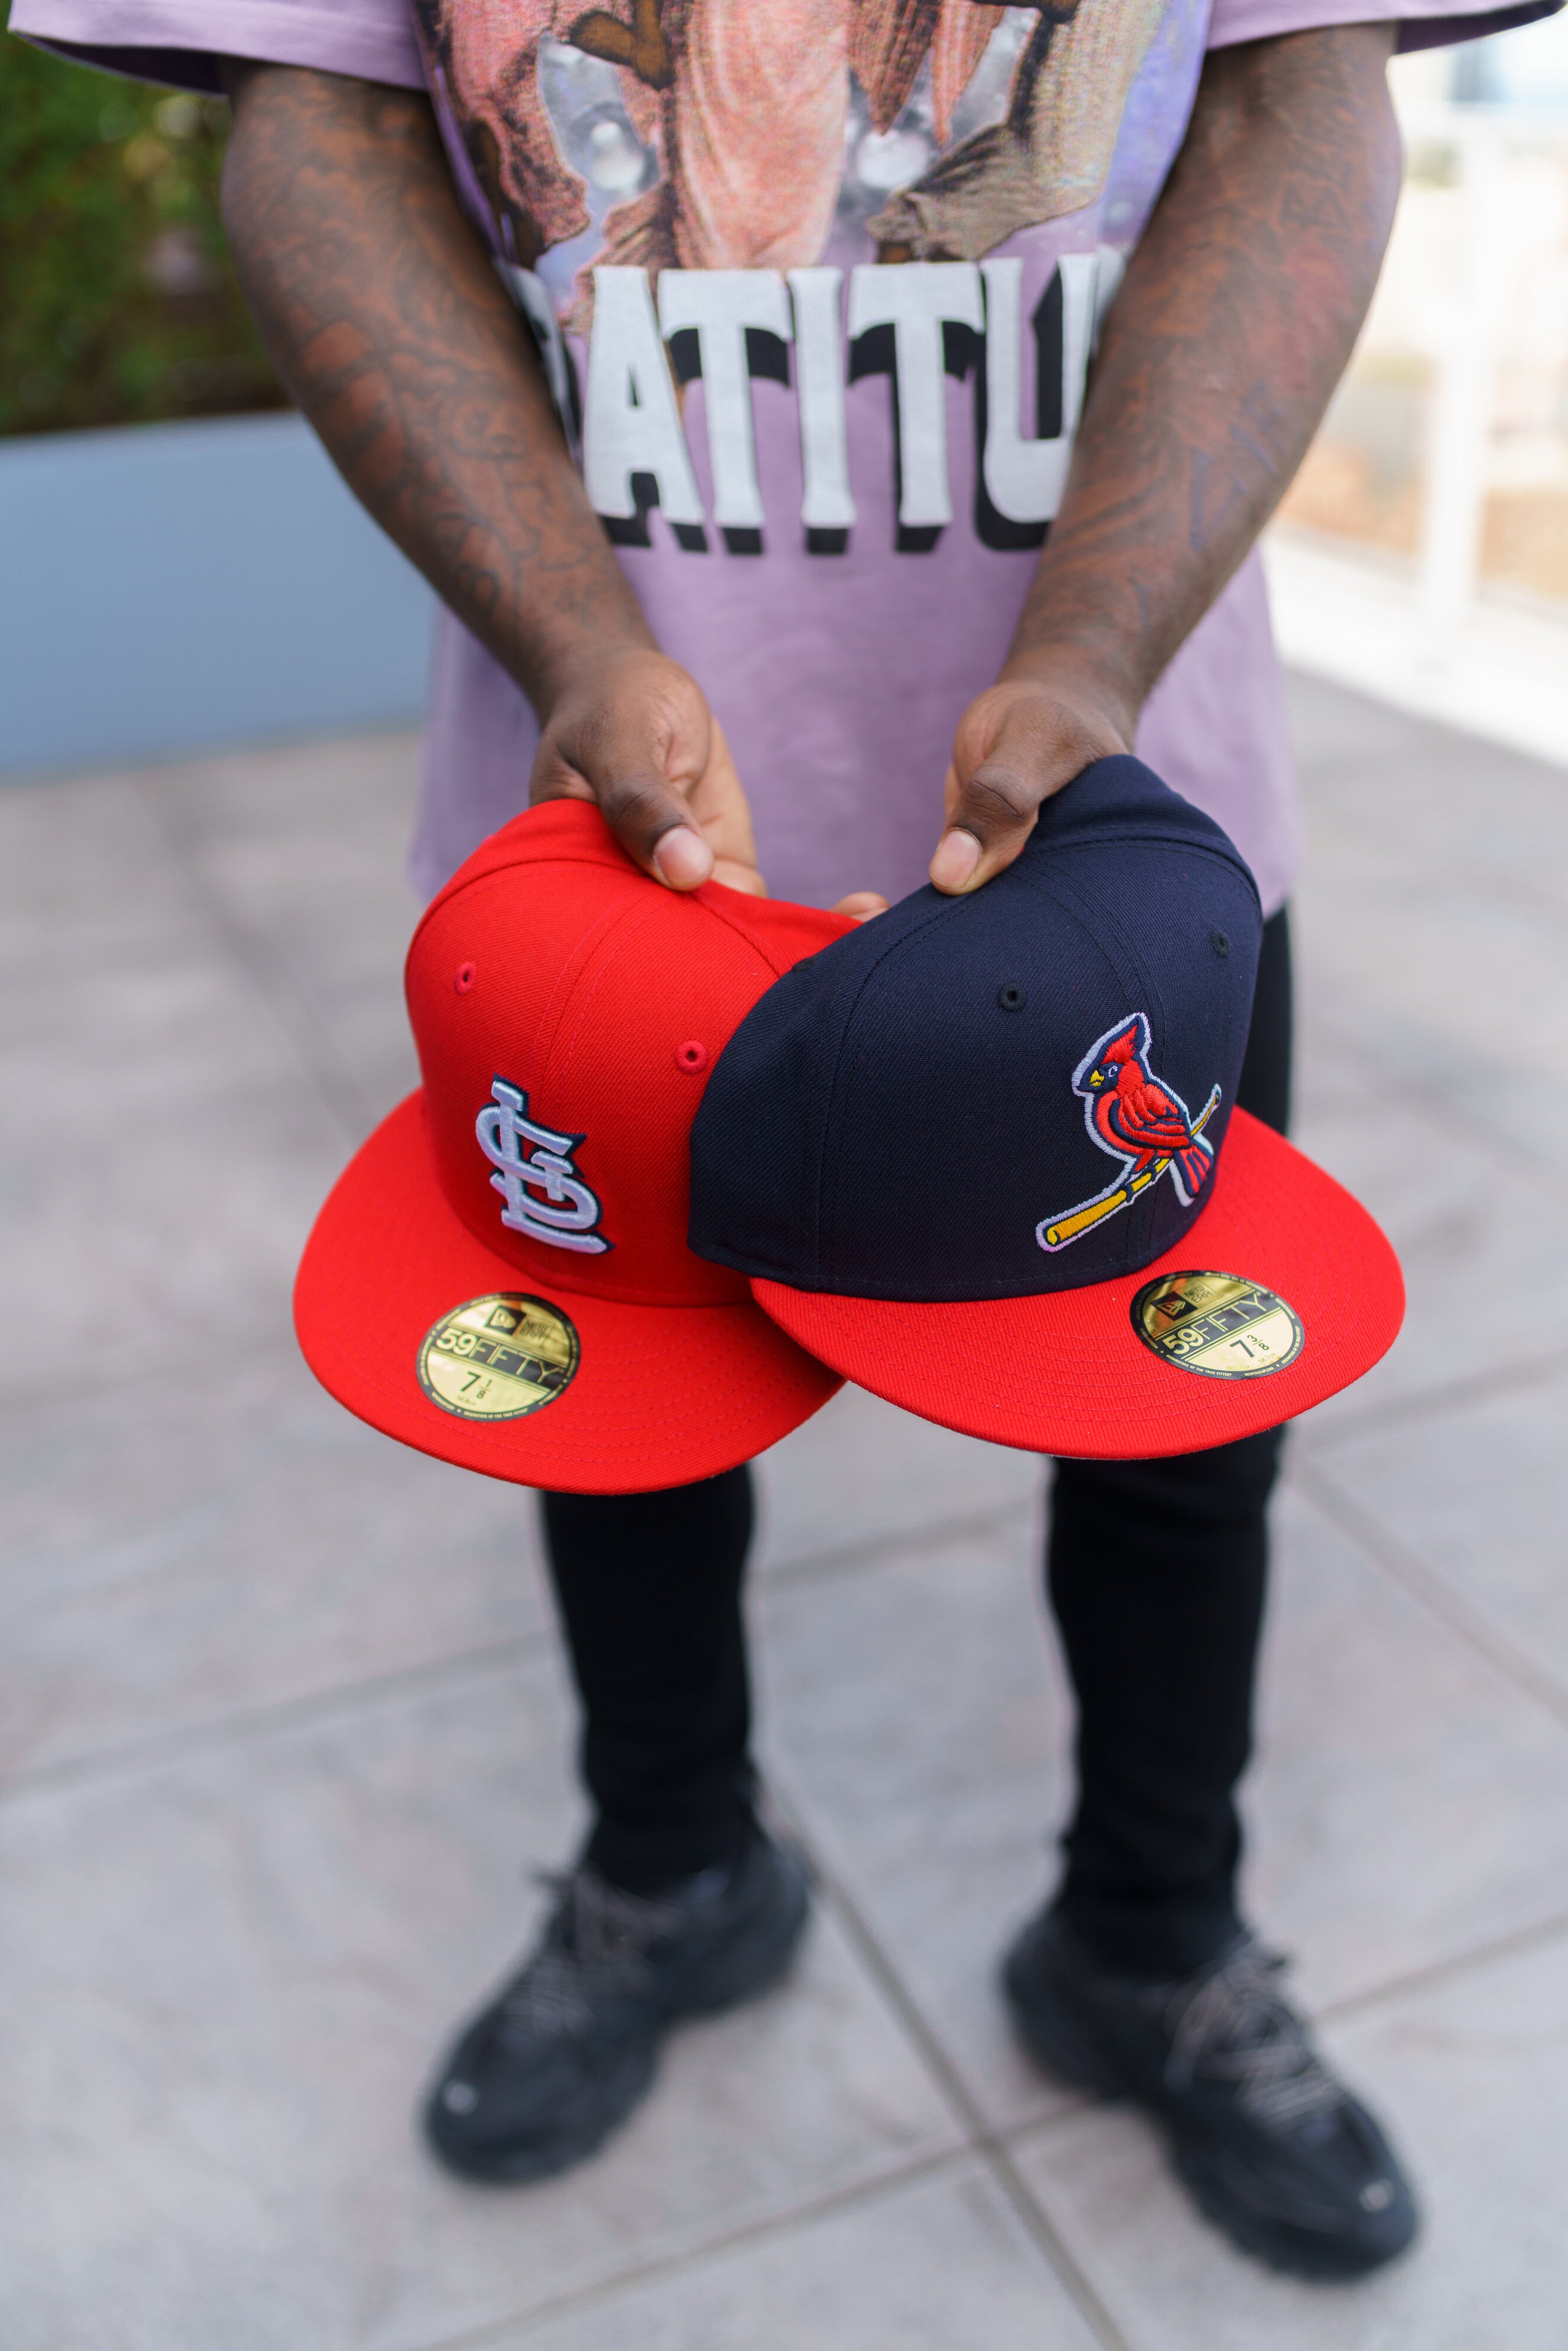 St. Louis Cardinals 2006 World Series Red 59Fifty Fitted Hat by